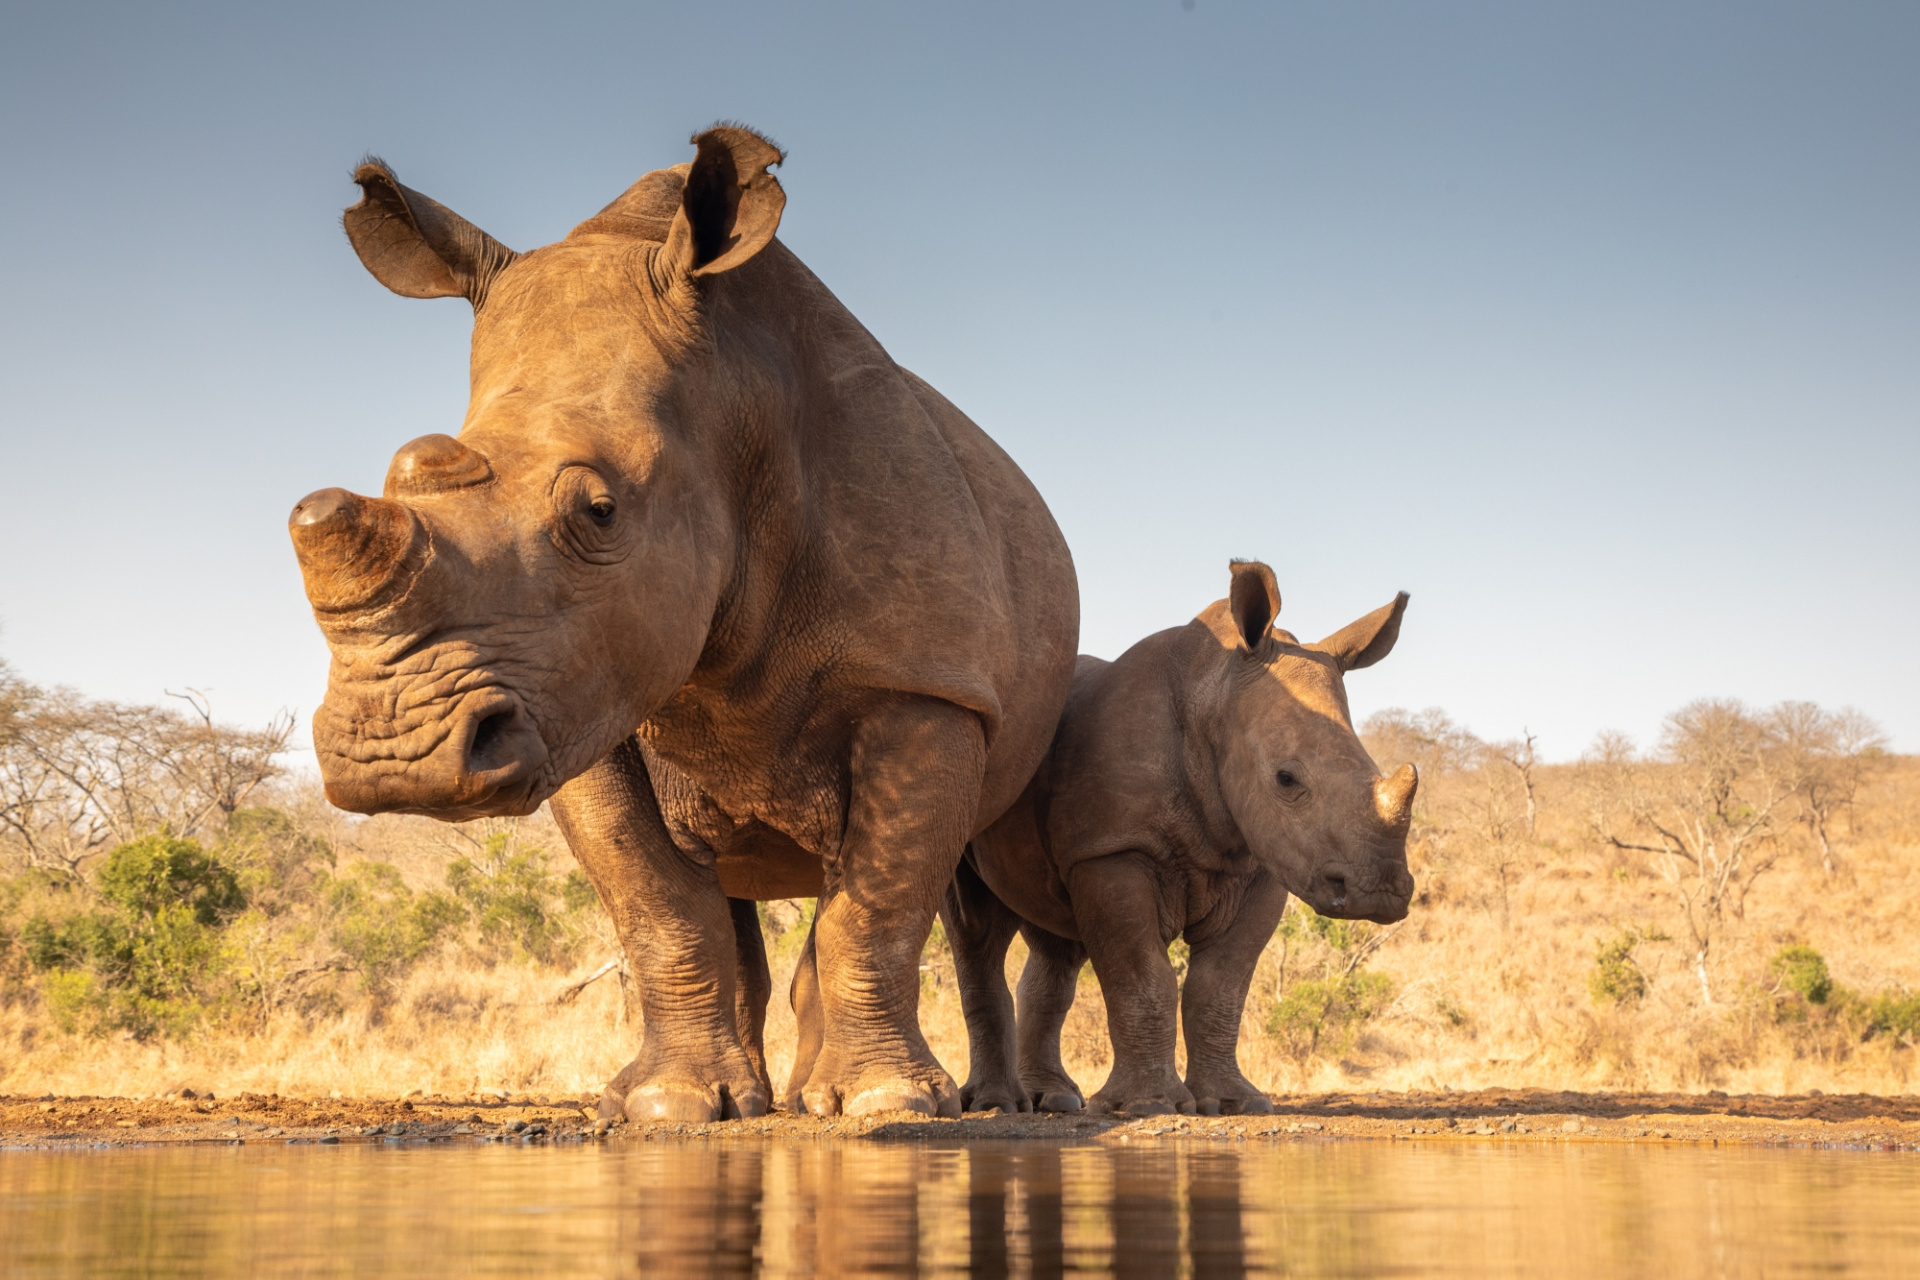 A rhino mother and her calf standing at a water source